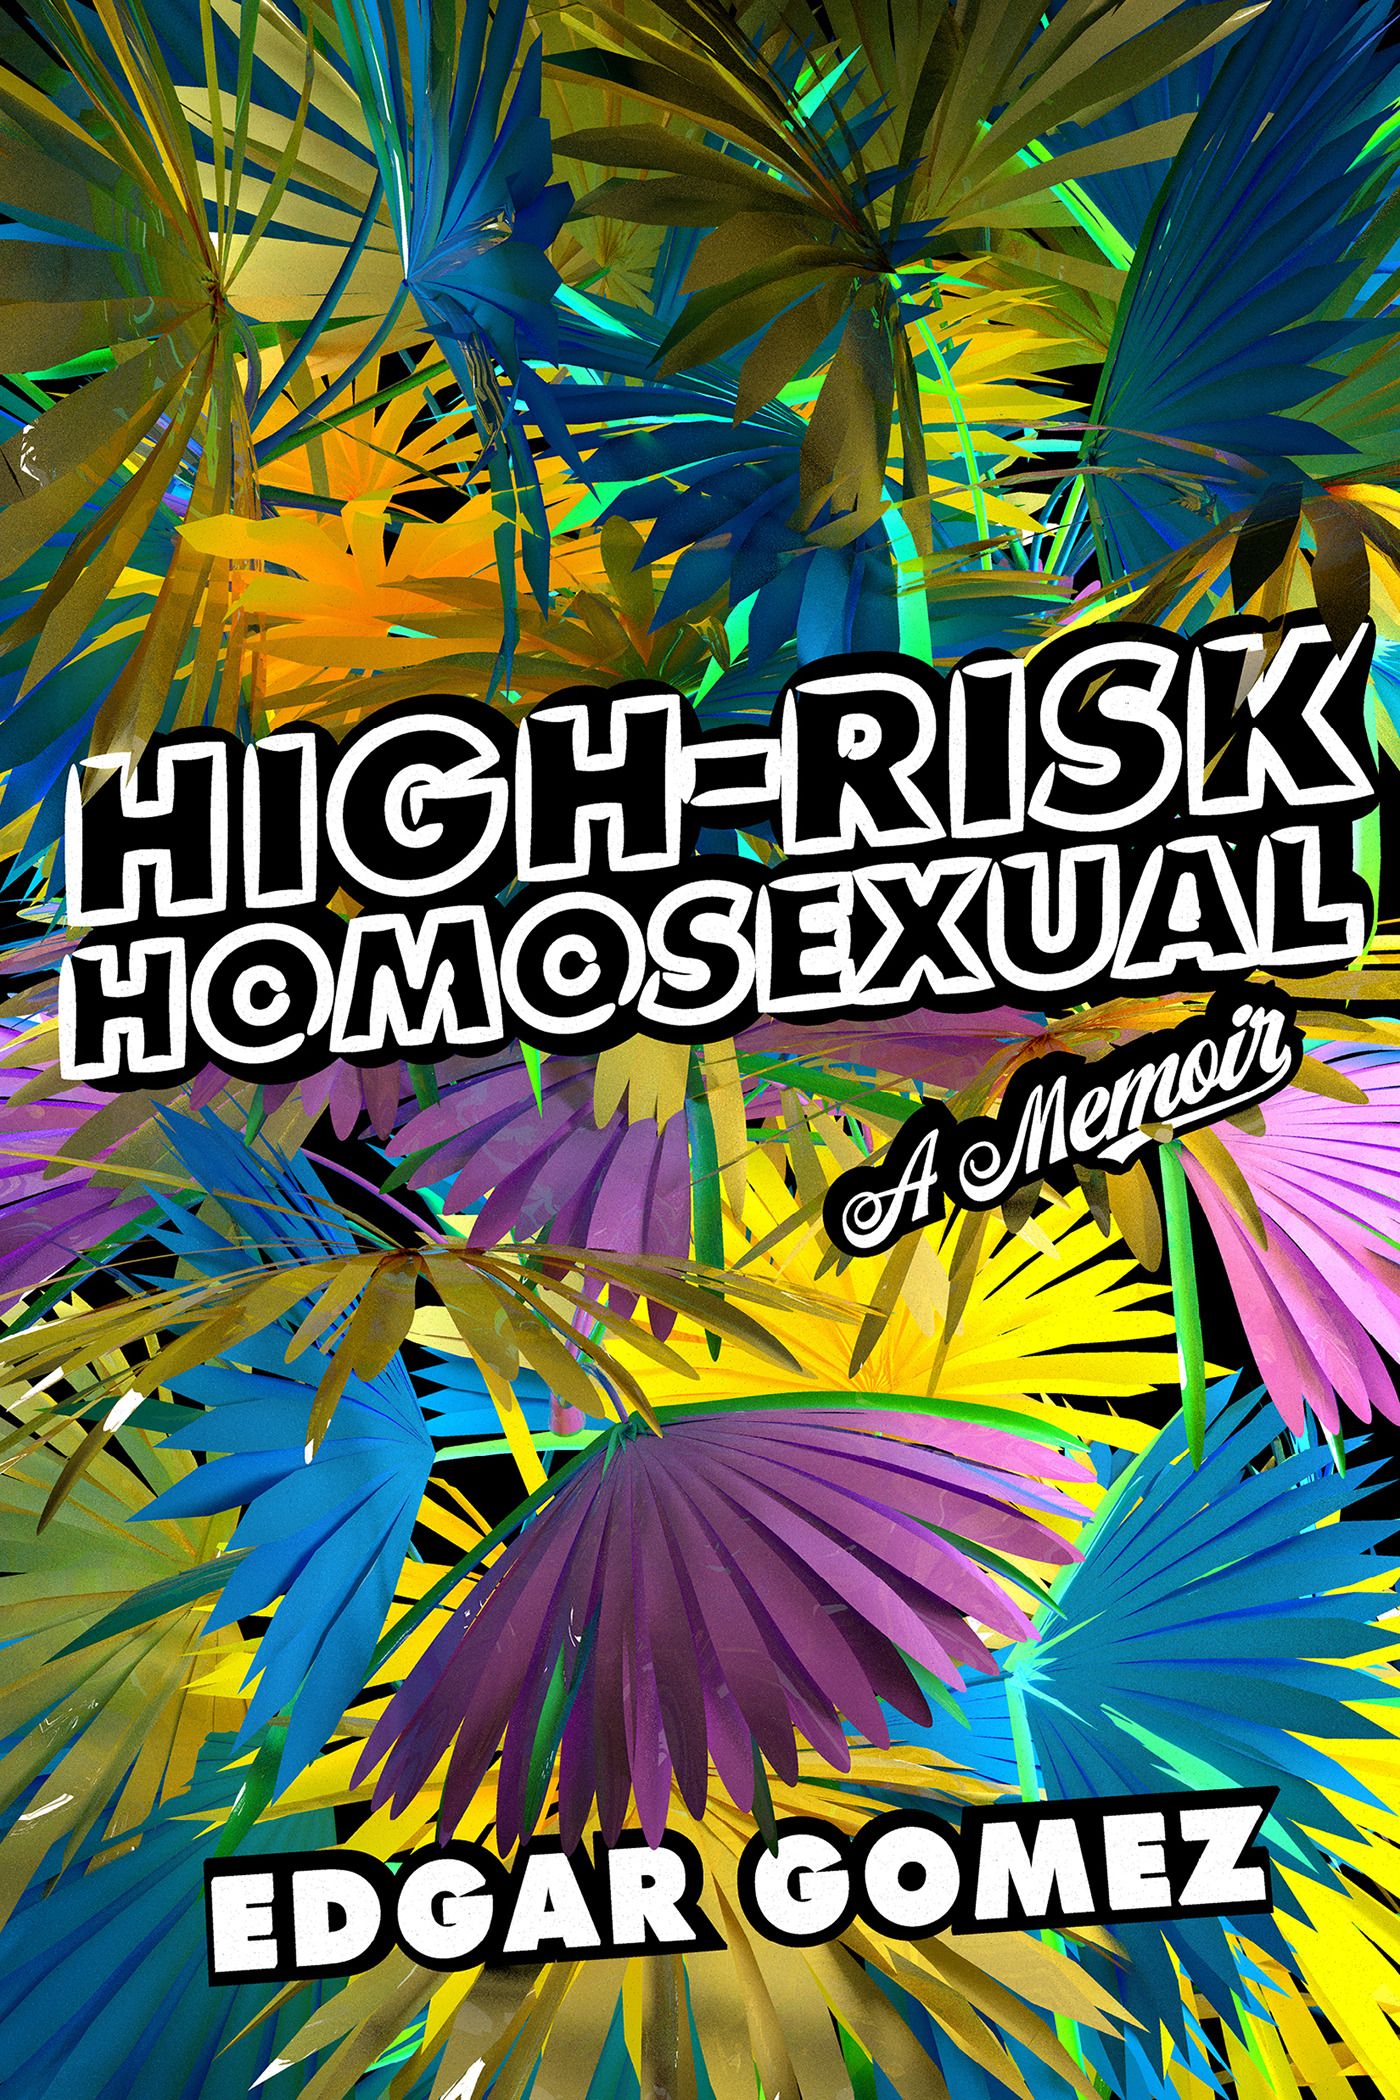 Cover of High-Risk Homosexual